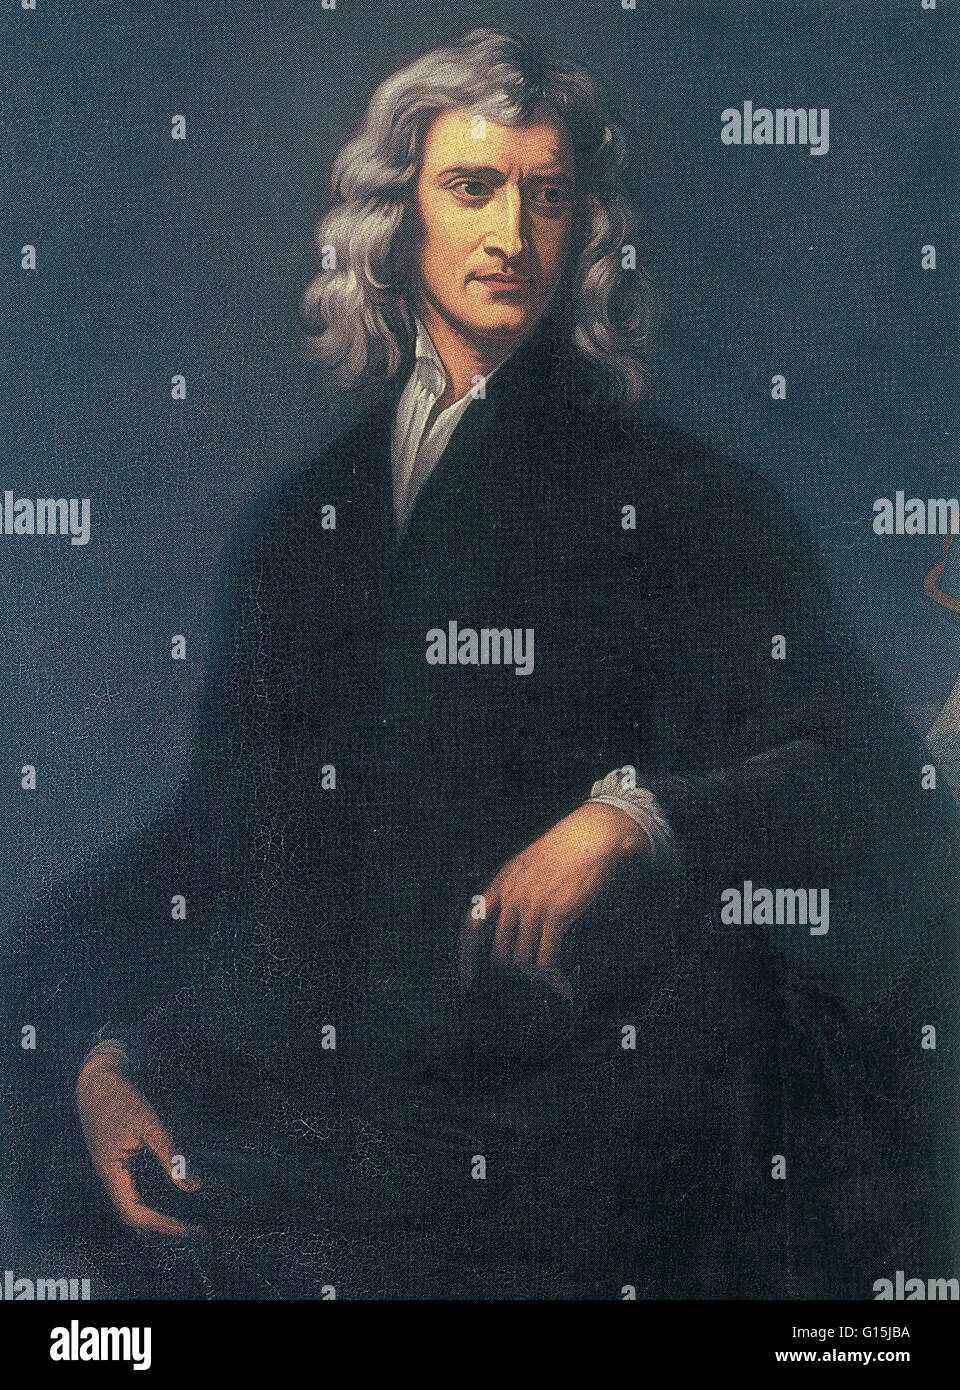 Isaac Newton (1642-1727) was an English physicist, mathematician, astronomer, natural philosopher, alchemist, and theologian. His monograph Philosophae Naturalis Principia Mathematica, published in 1687, lays the foundations for most of classical mechanic Stock Photo